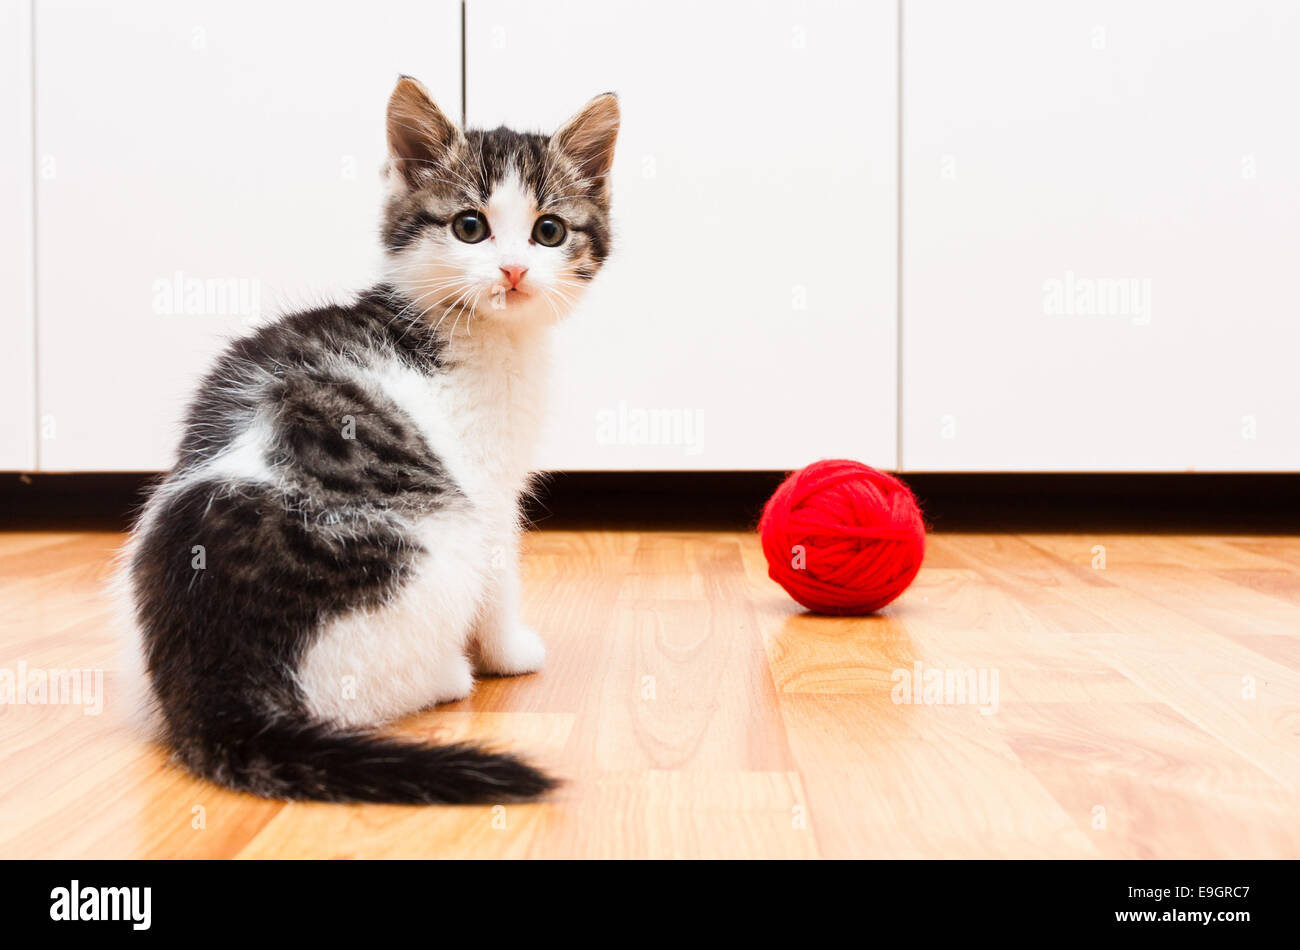 Small kitten with red ball of yarn looking at camera Stock Photo